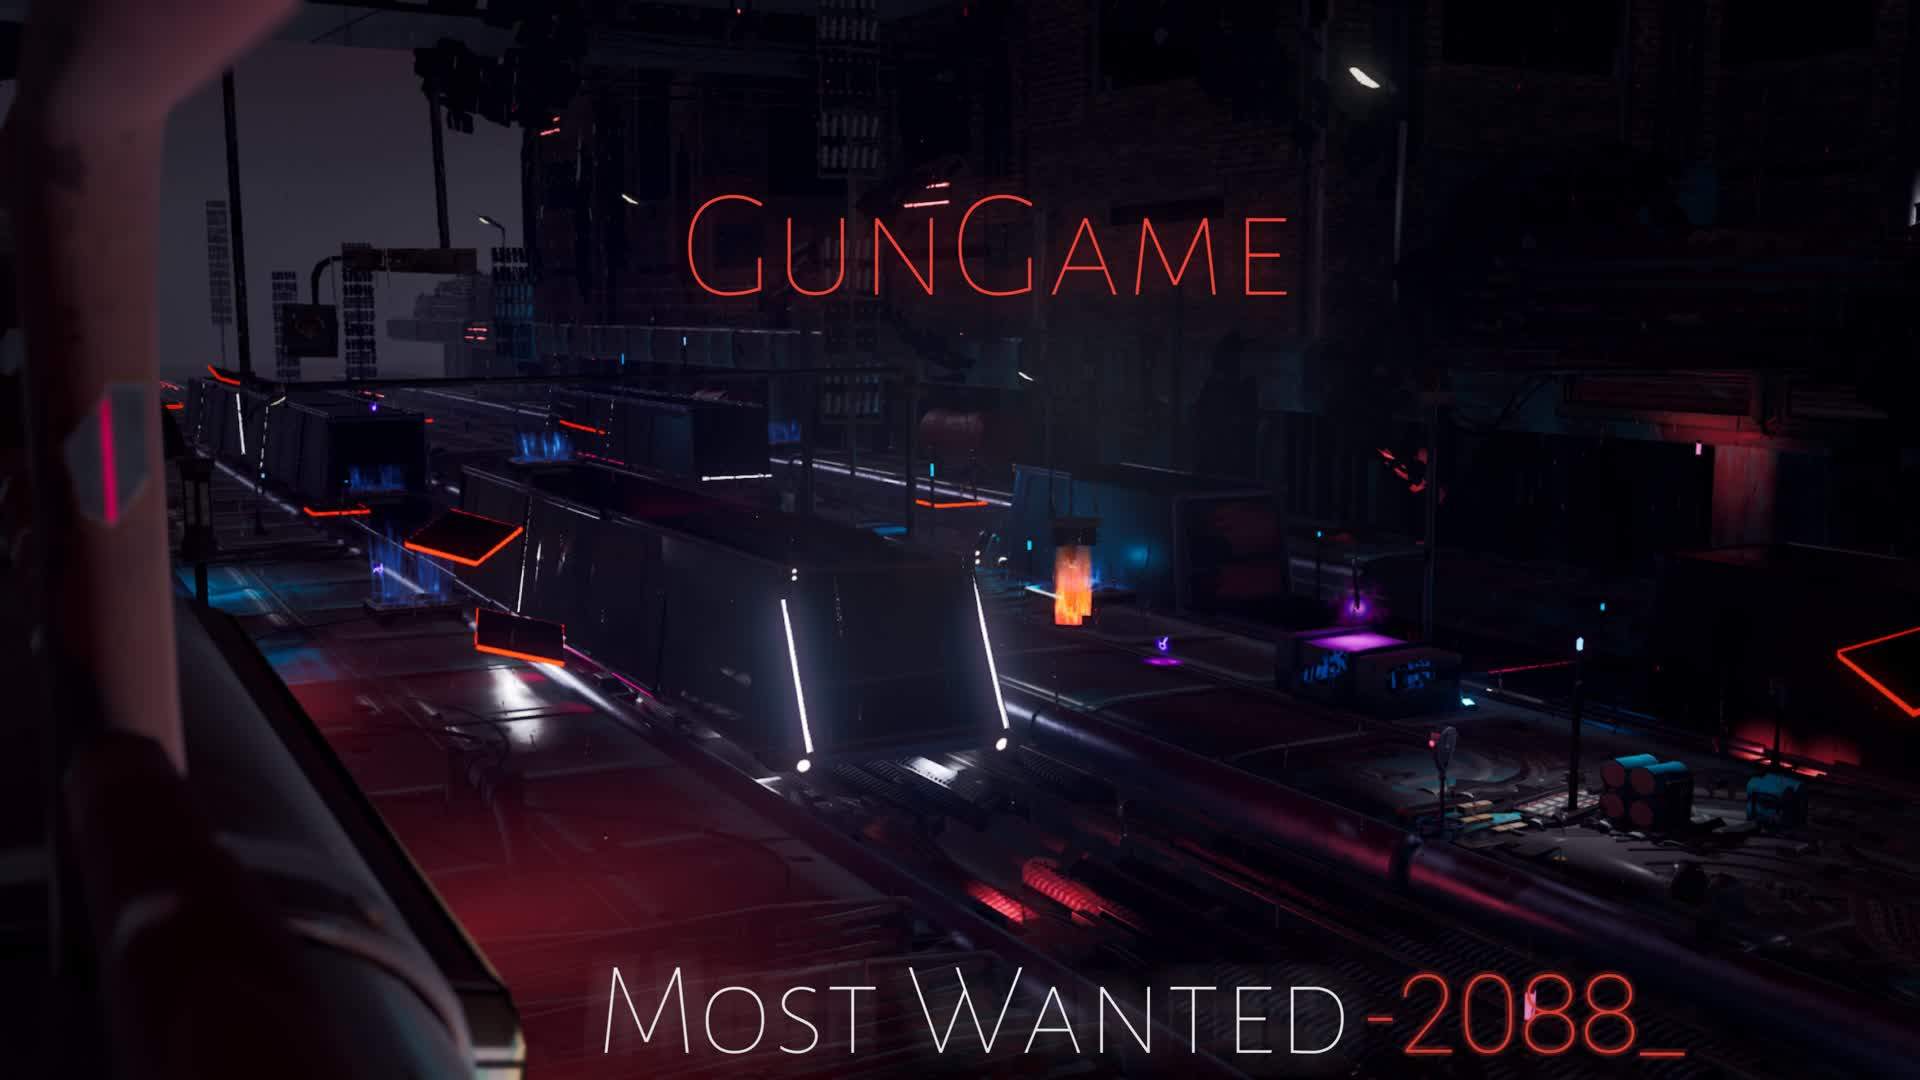 MOST WANTED -2088_ •GUNGAME•